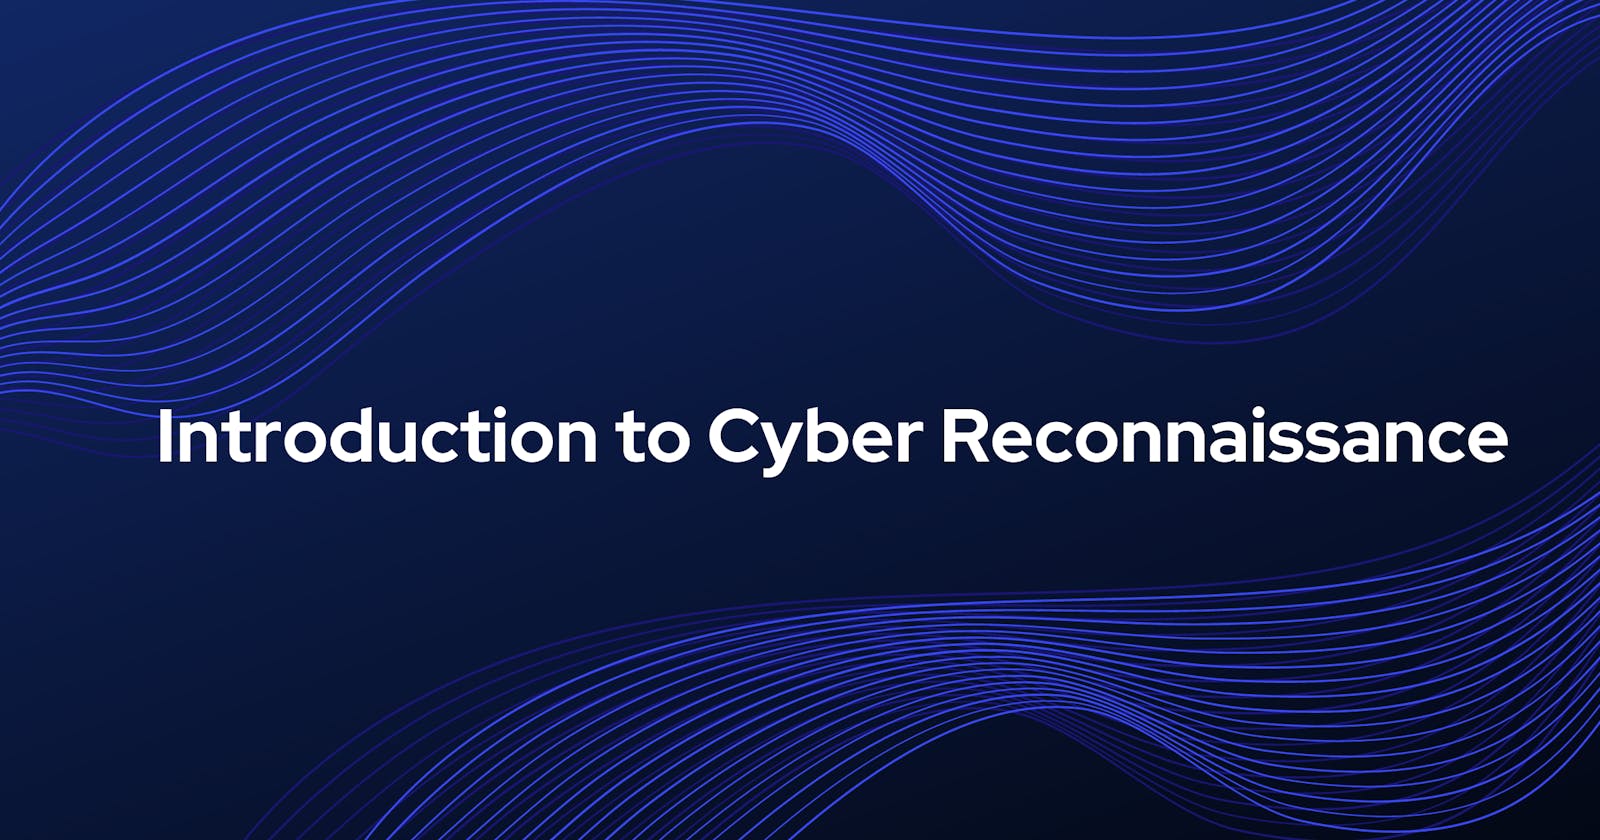 Introduction to Cyber Reconnaissance (Recon)